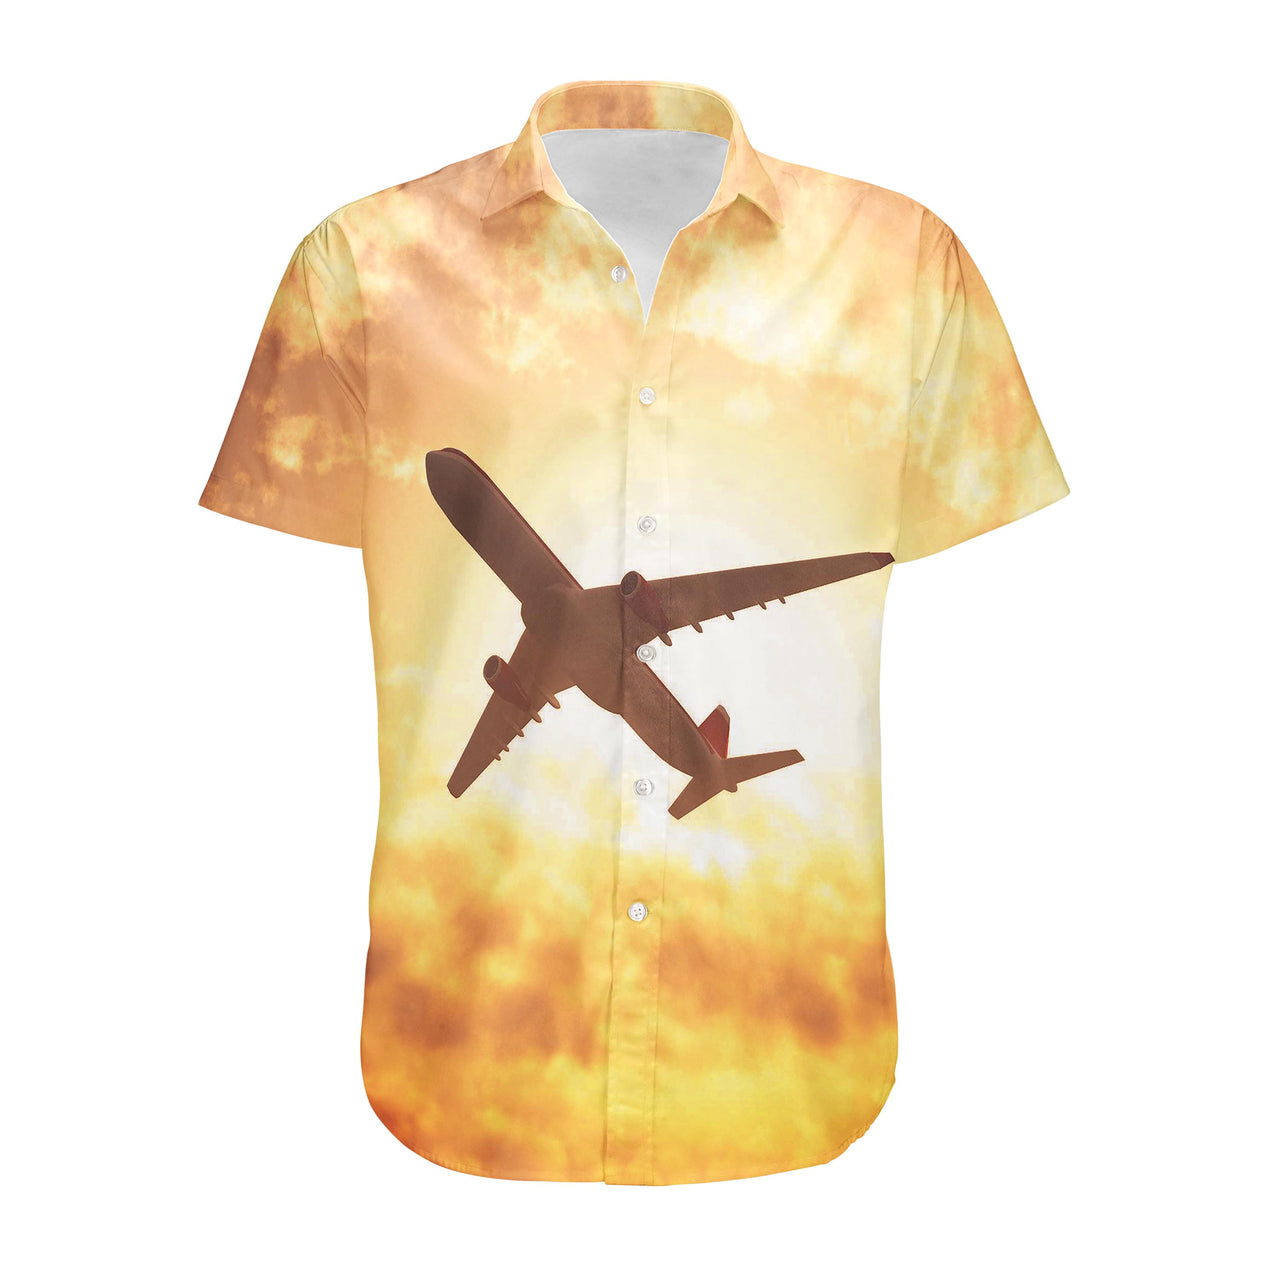 Plane Passing By Designed 3D Shirts